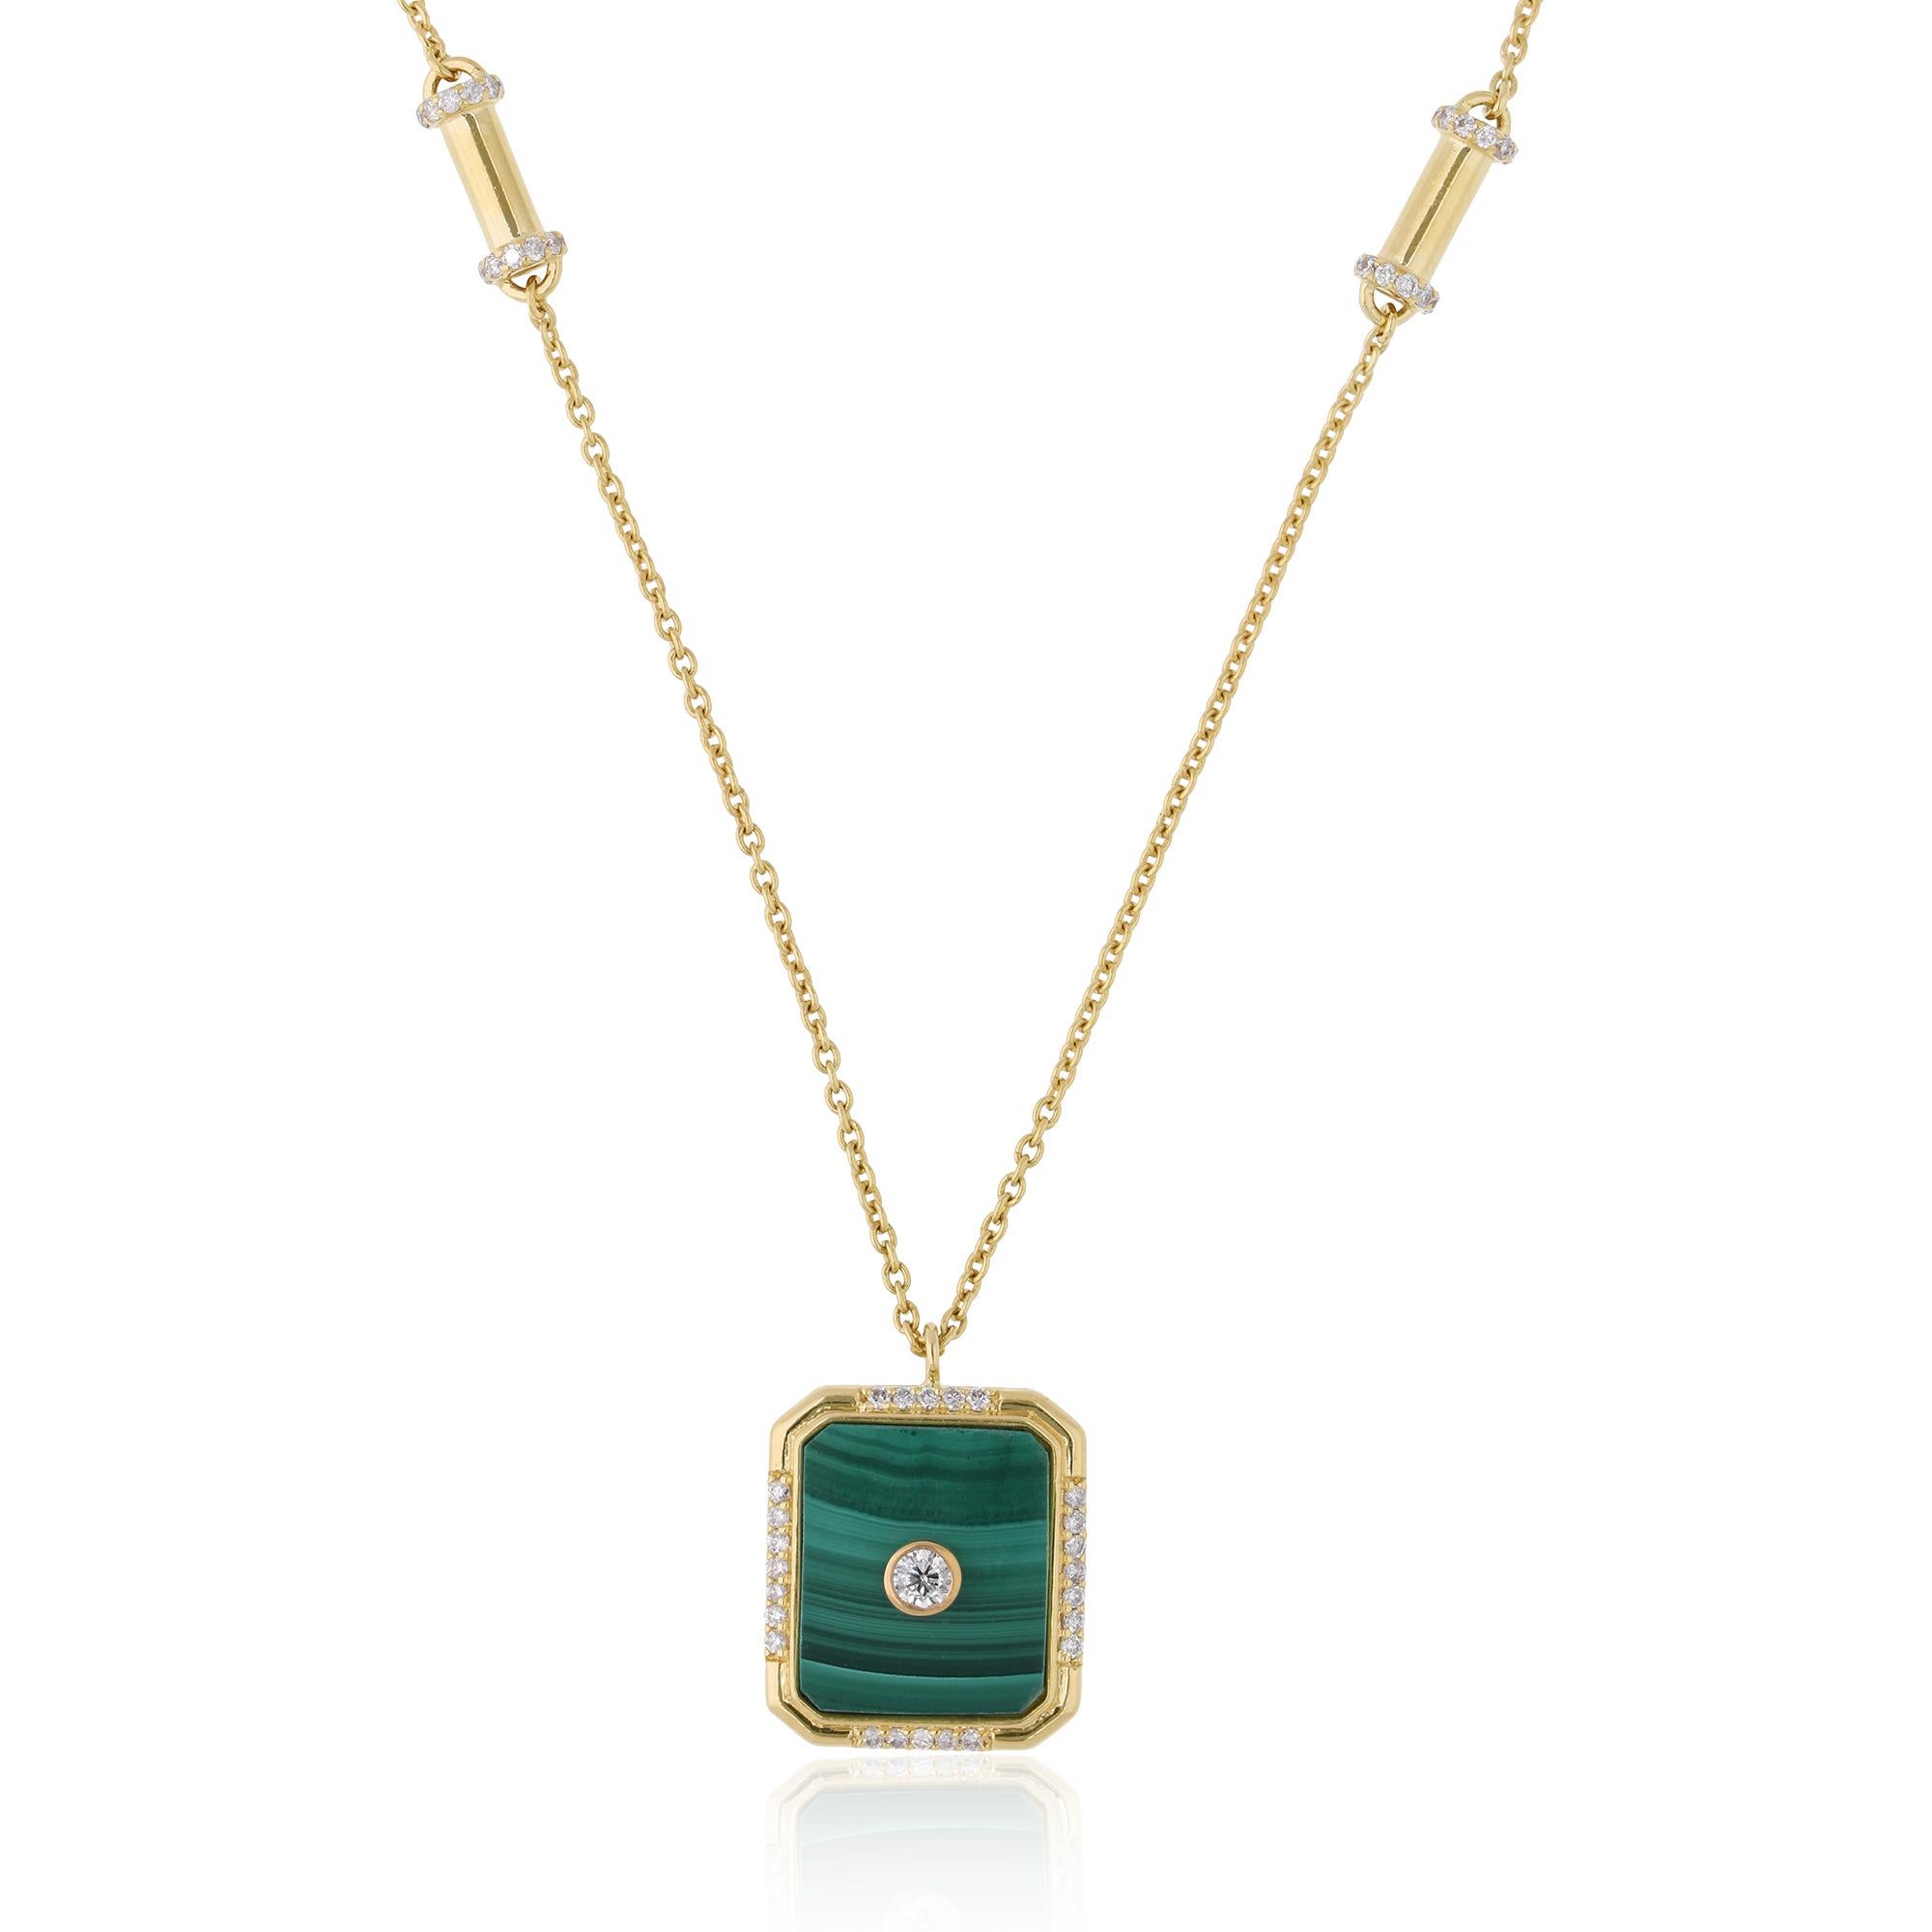 Item Code :- SEPD-3658
Gross Wt. :- 6.90 gm
18k Yellow Gold Wt. :- 5.63 gm
Natural Diamond Wt. :- 0.44 Ct. ( AVERAGE DIAMOND CLARITY SI1-SI2 & COLOR H-I )
Malachite Wt. :- 5.90 Ct.
Necklace Length :- 16 Inches Long

✦ Sizing
.....................
We